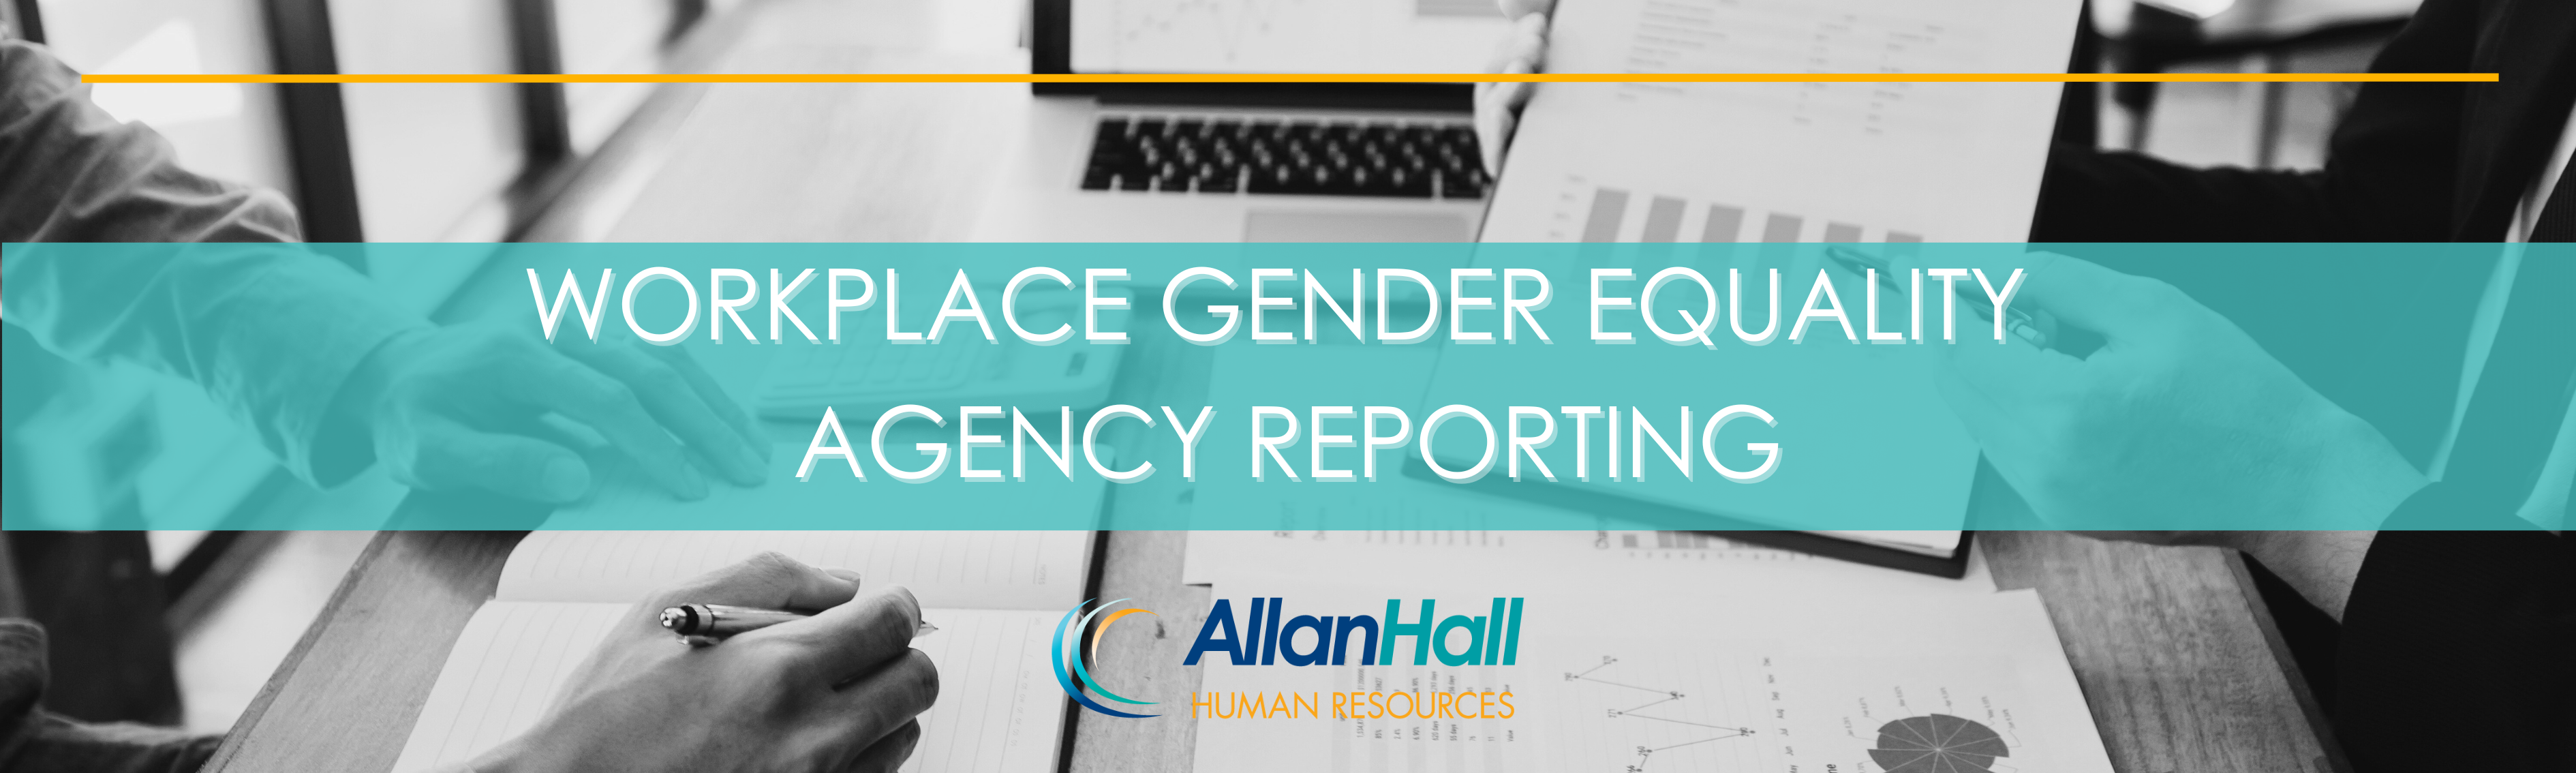 Workplace Gender Equality Agency Reporting